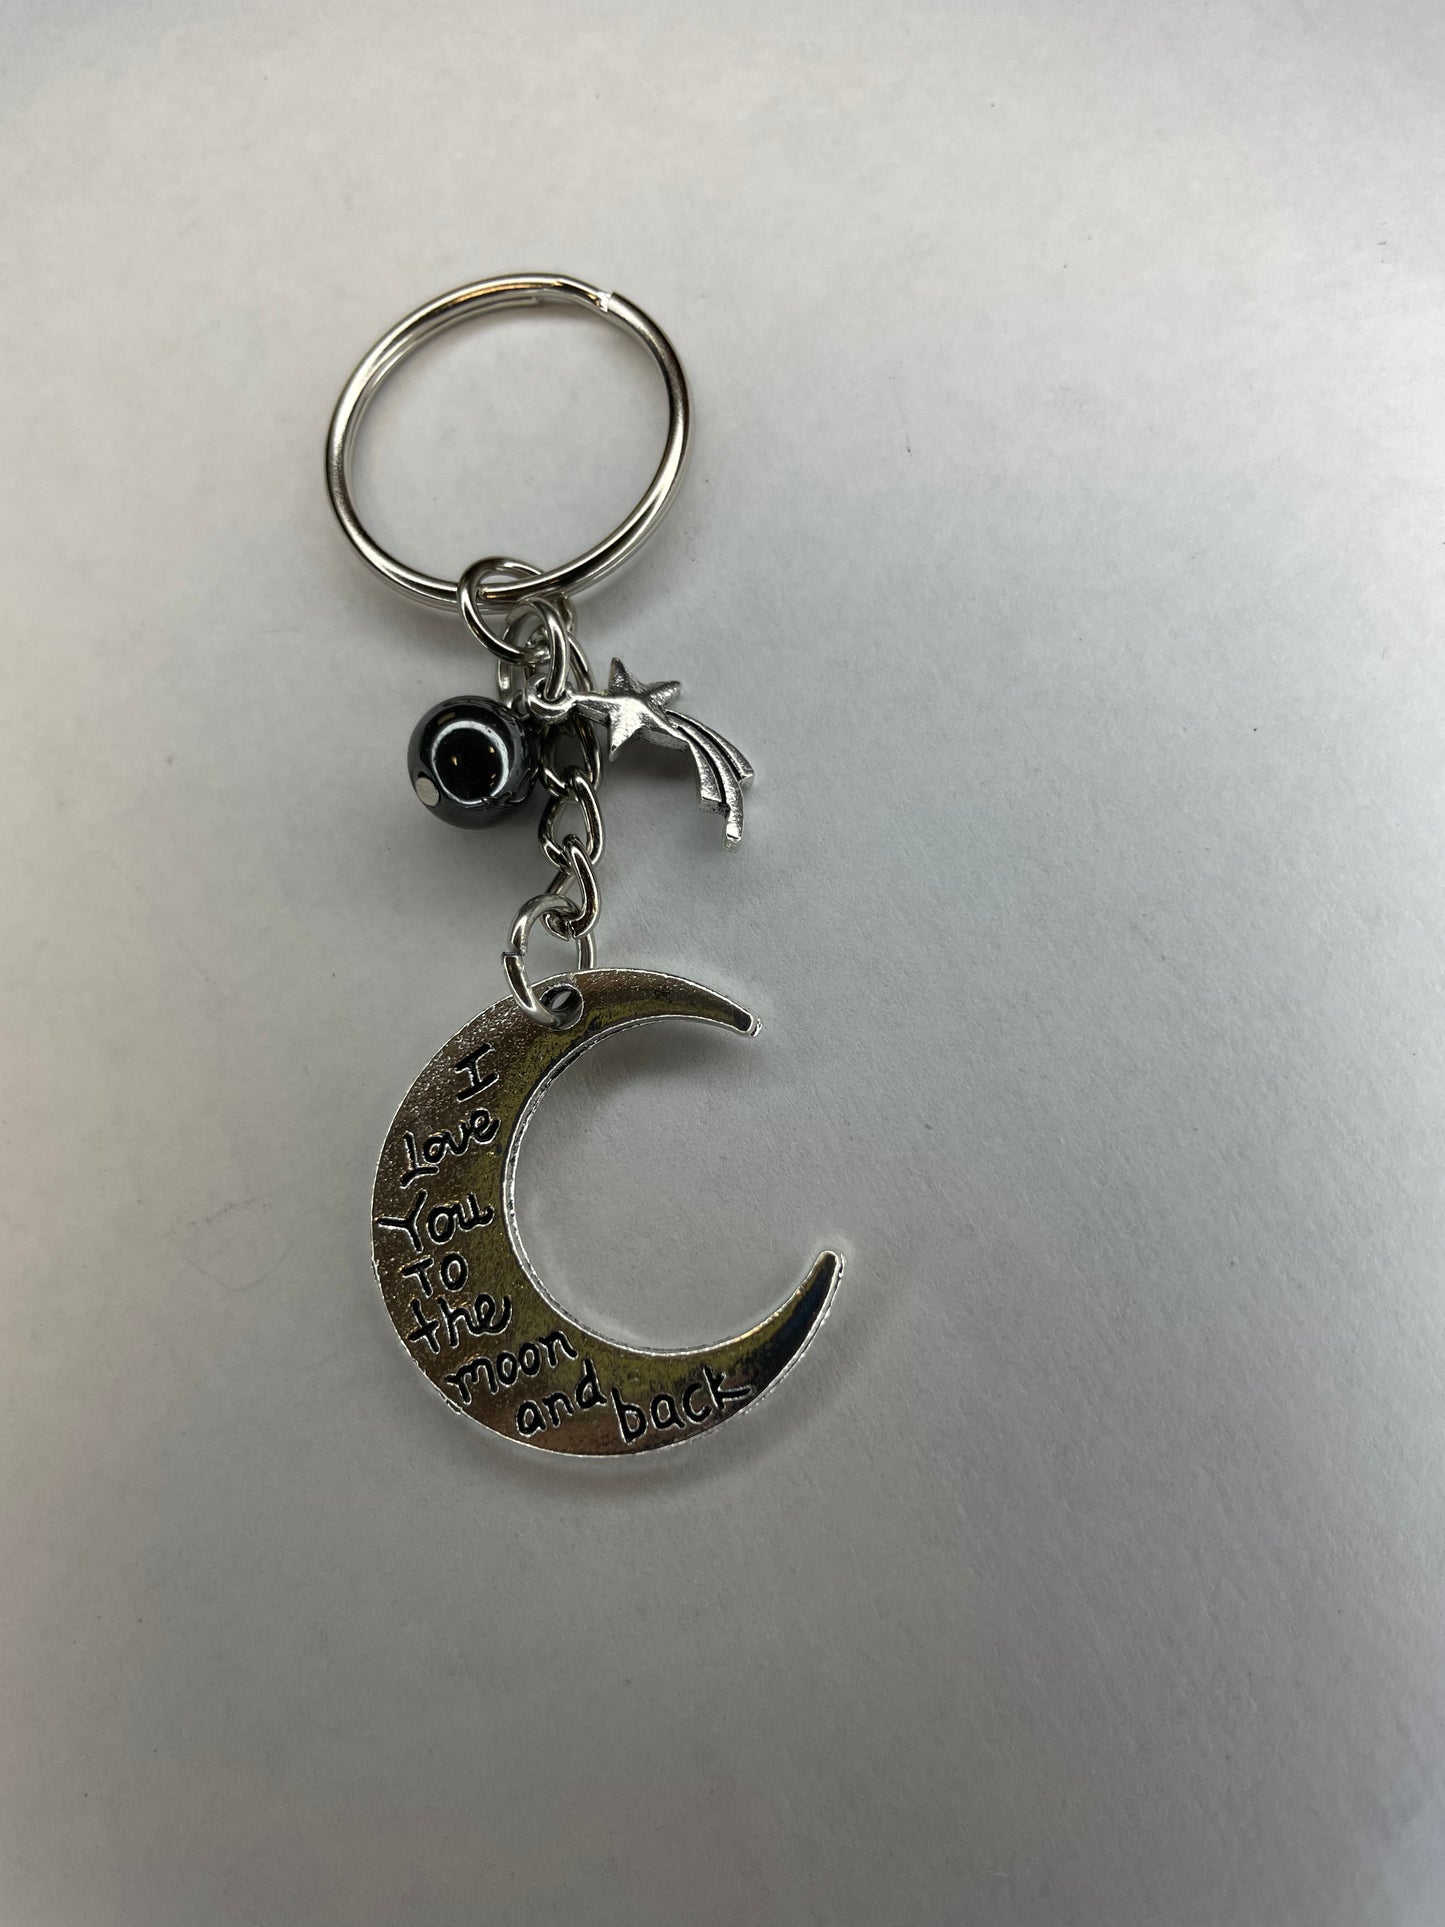 I Love You to the Moon and Back Keychain, Shooting Star, Hematite (grounding / protection)